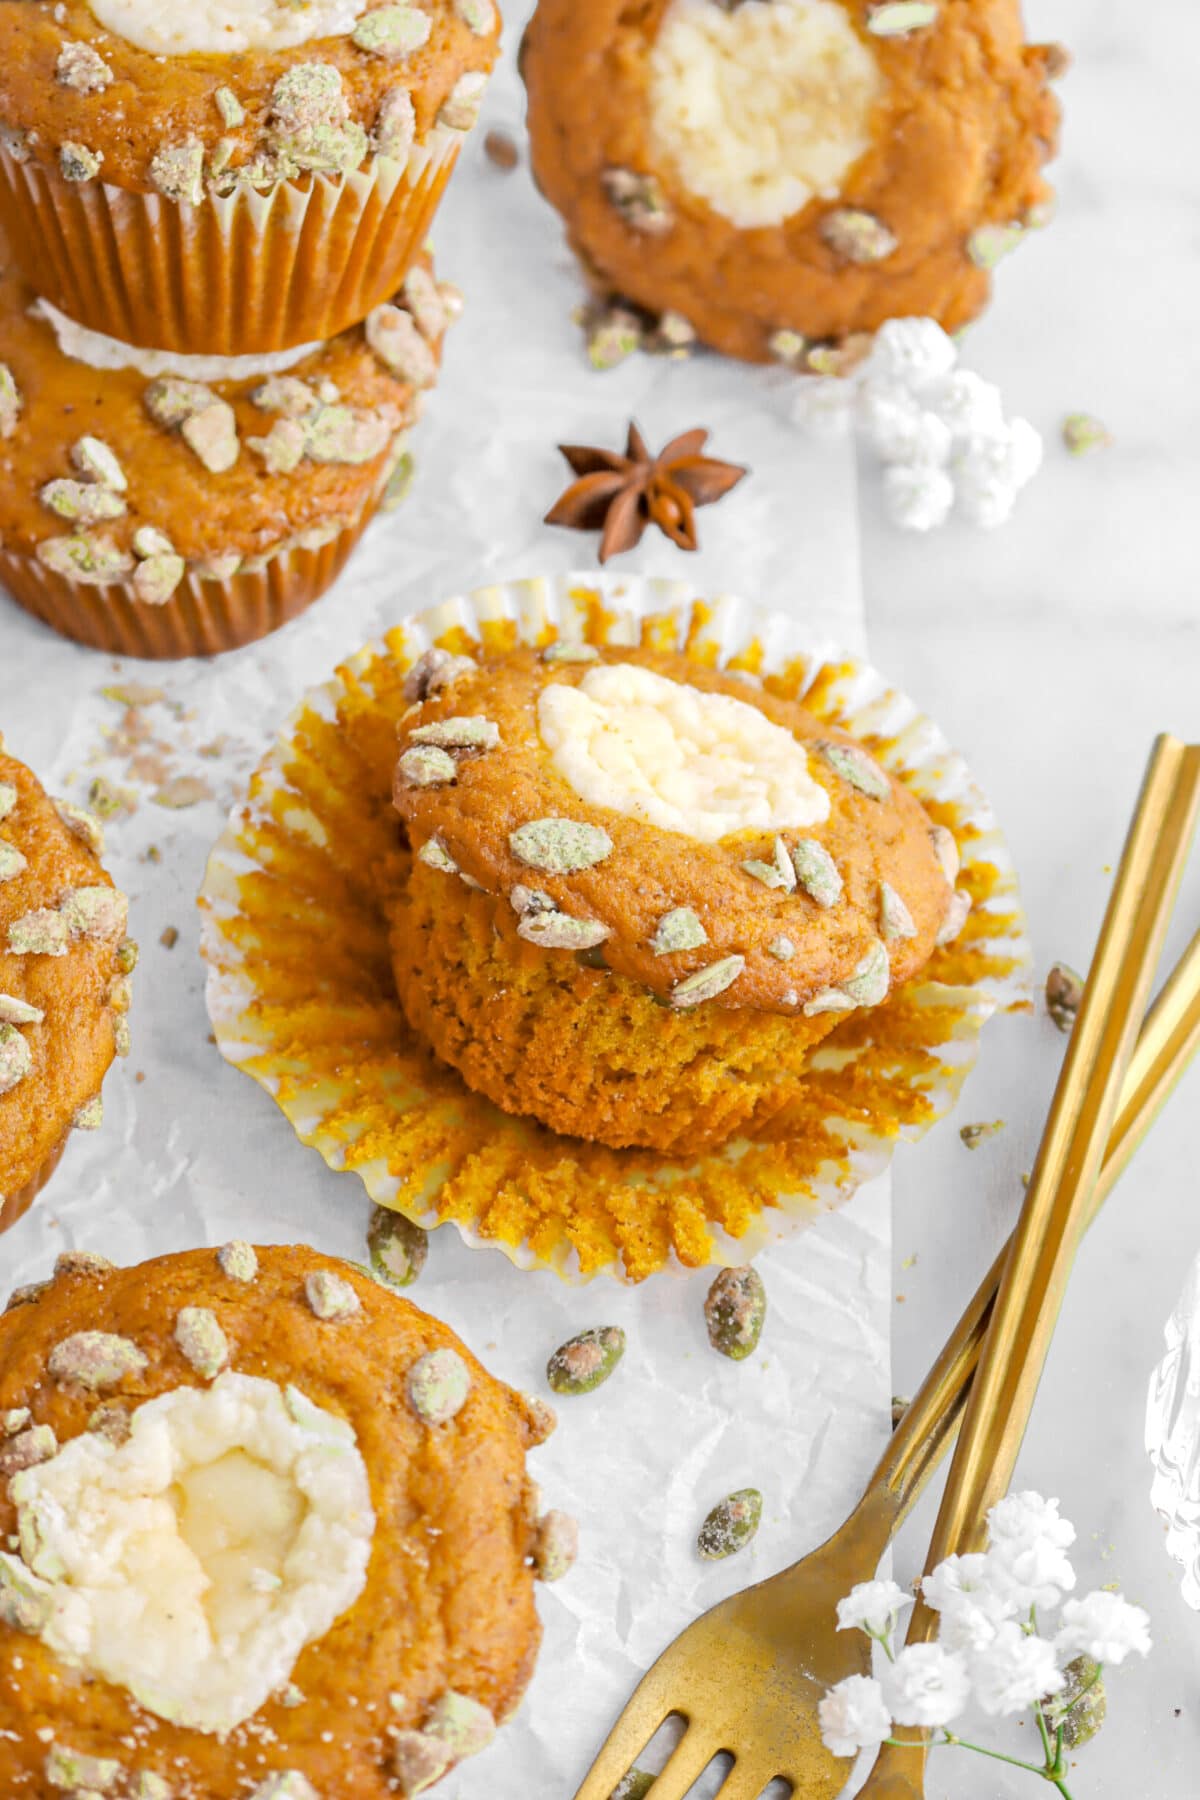 Spiced Pumpkin Muffins with Sweet Cream Cheese Filling (Starbucks Copycat!)